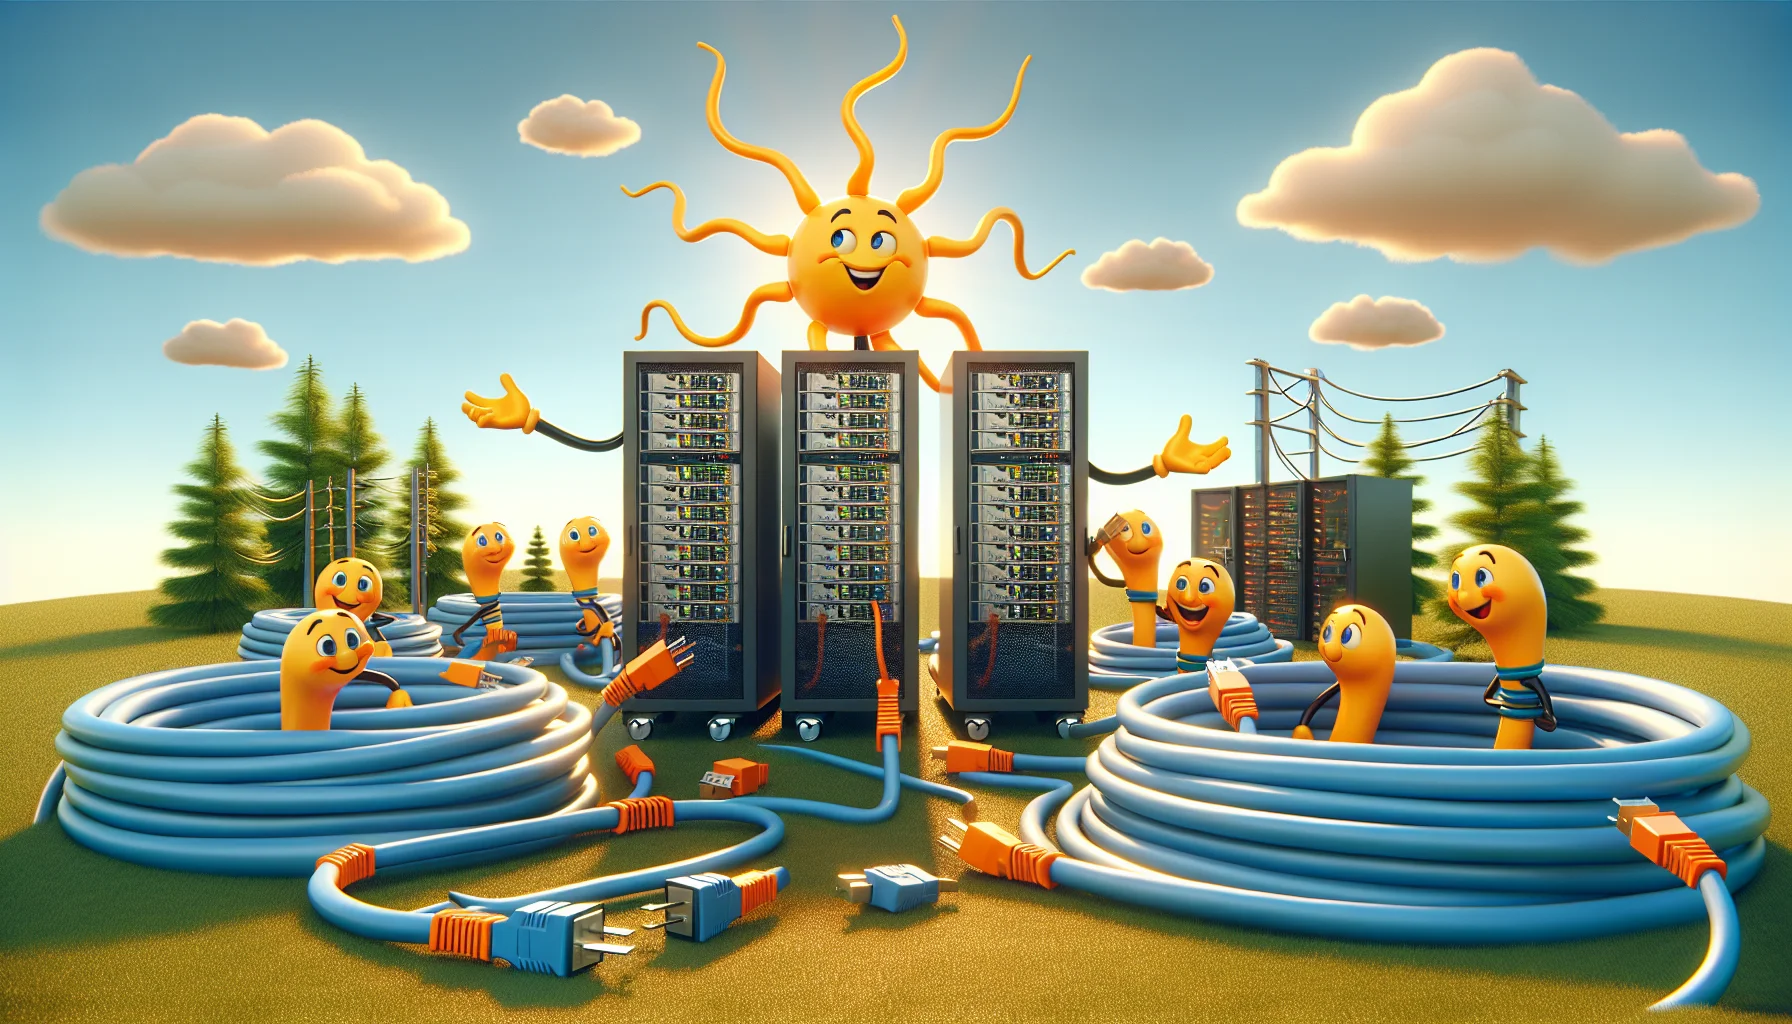 Depict a humorous scenario involving a web hosting server theme, set within a sunny scenic backdrop. In this image, cables and server racks are personified, joyfully interacting in the sunlit environment. Among these, one server rack, stands with a crowning antenna, taking the role of a charismatic host. The scene is a playful anthropomorphism, making light of the hosting duties that servers perform in the digital world. The servers, while thoroughly enjoying their sunny setting, carry out their duties with comical precision and coordination, thereby symbolizing 'sunny upstate' data centers catering to online services.